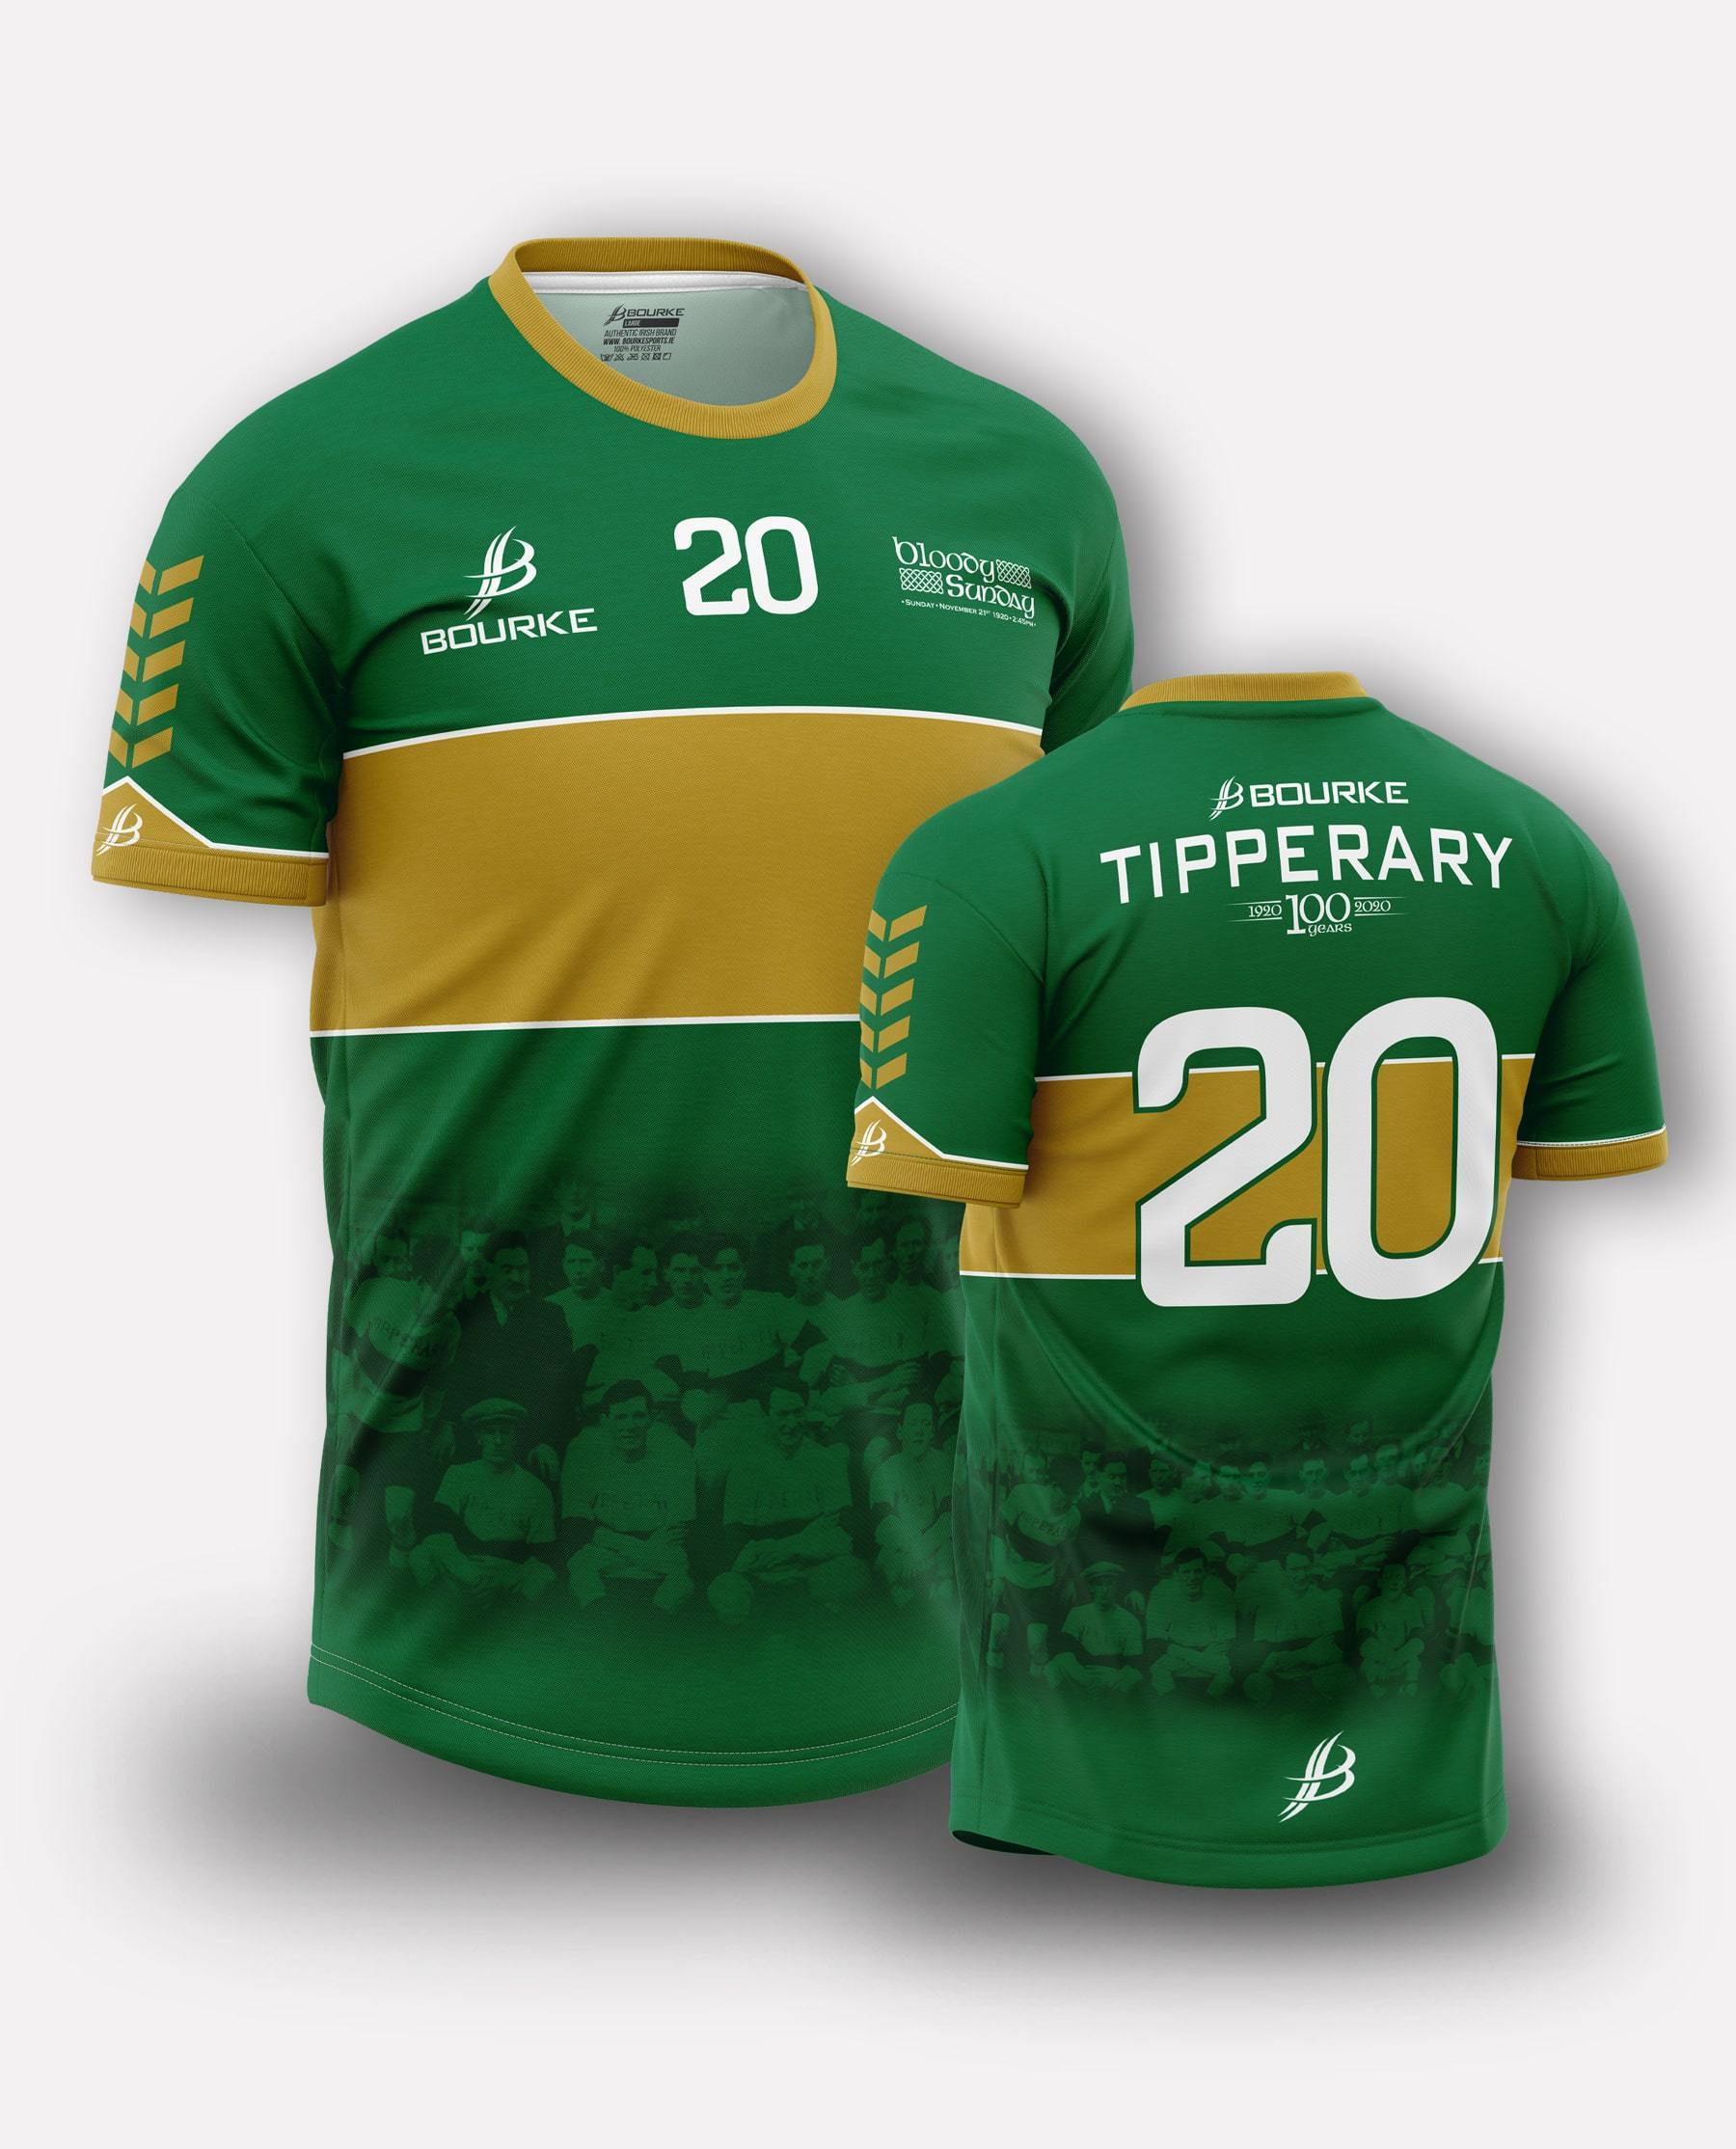 Tipperary 1920 Jersey (Green) - Bourke Sports Limited